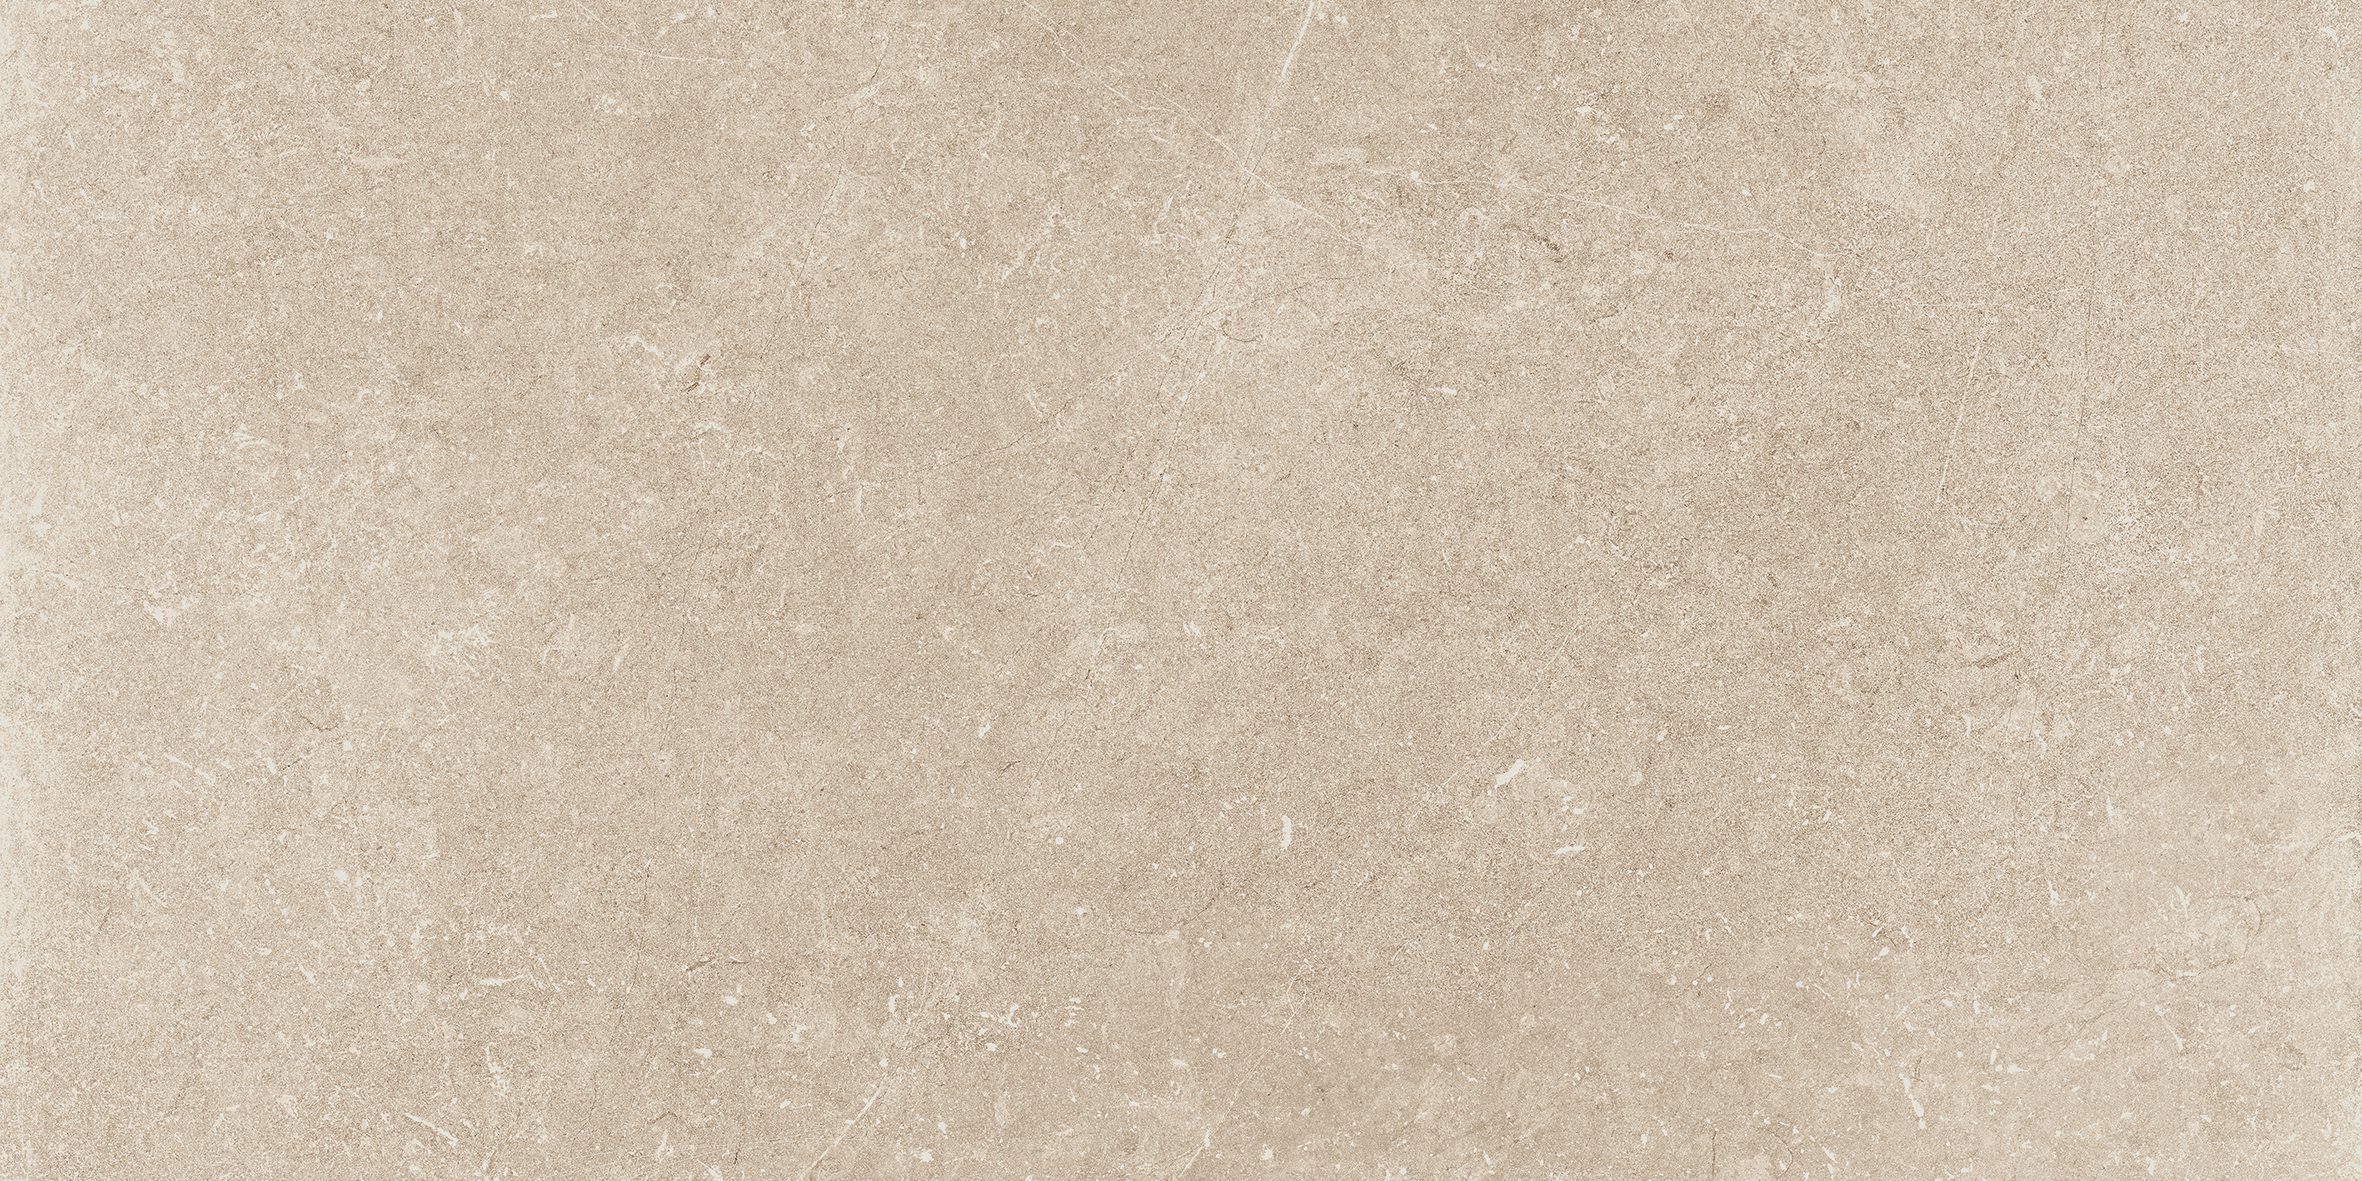 Panaria Prime Stone Sand Prime Antibacterial - Soft PG-PM40 30x60cm rectified 9,5mm